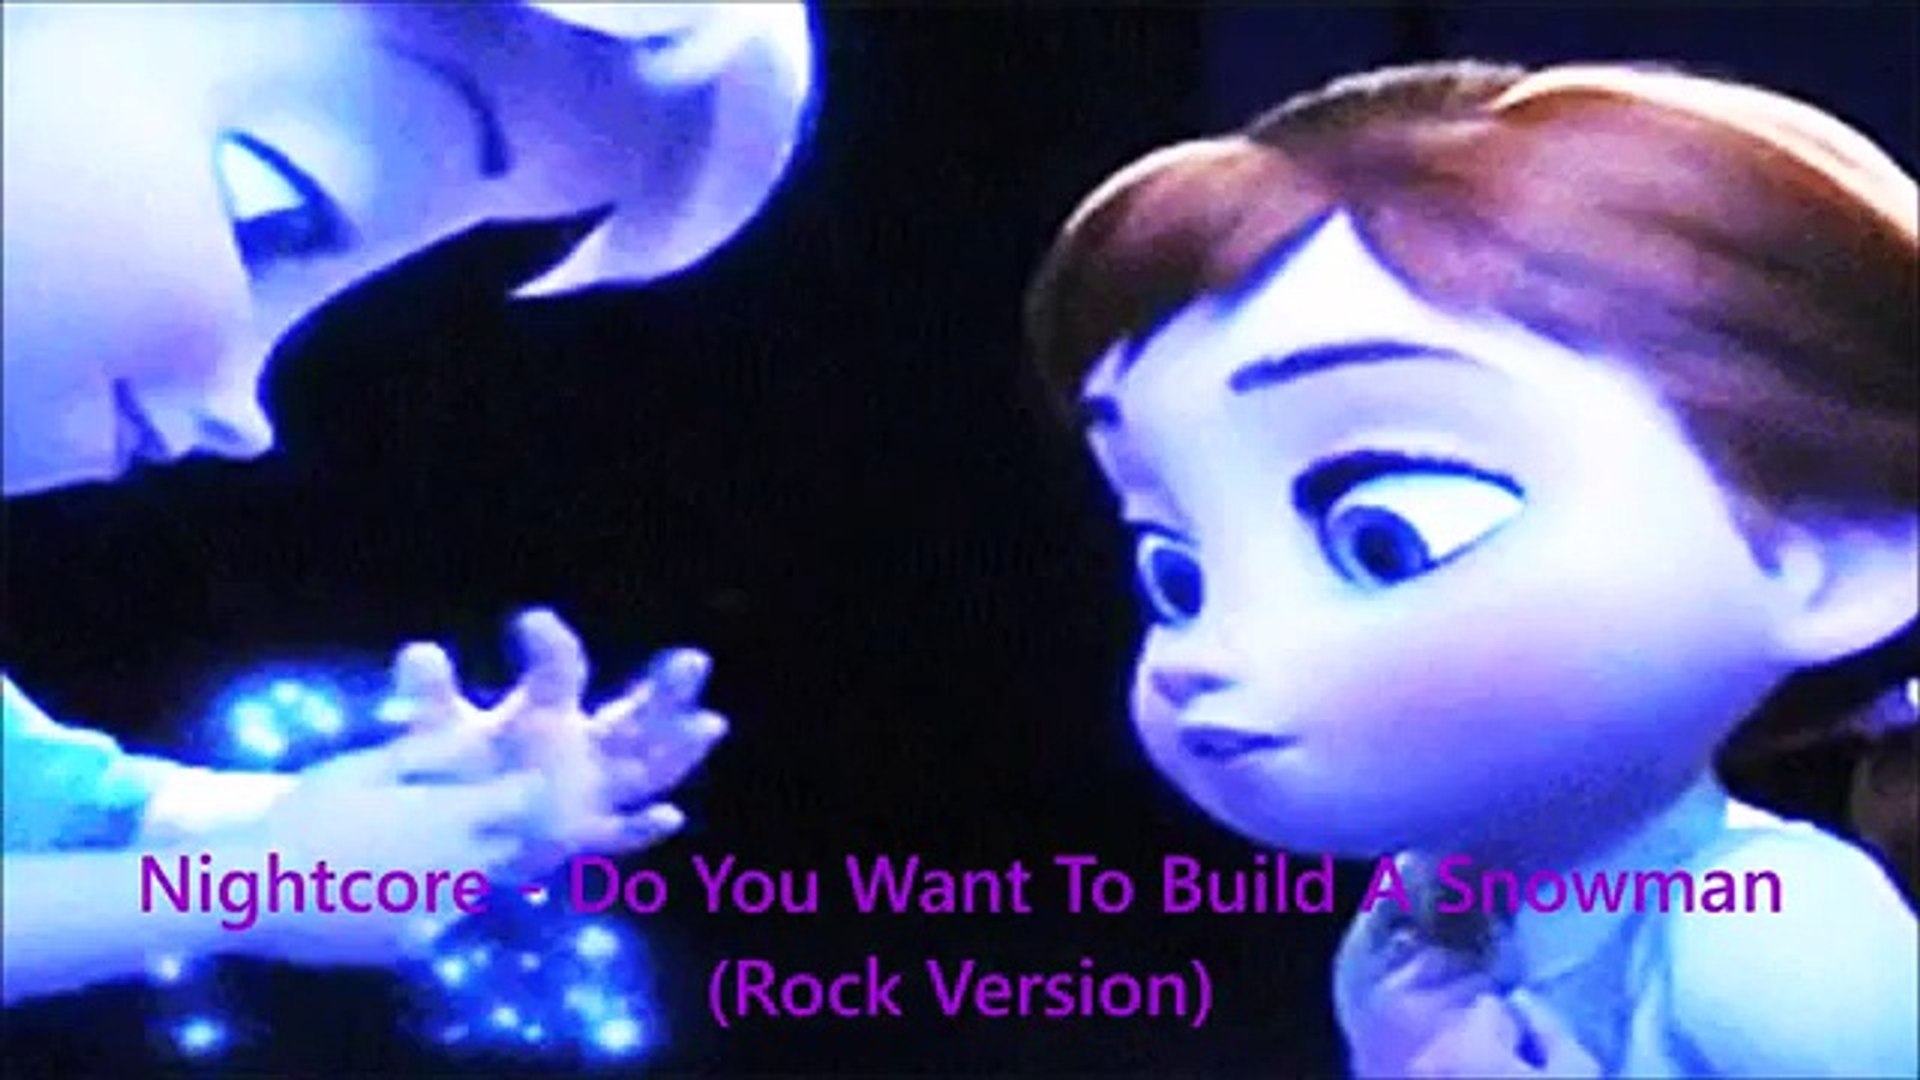 Do You Want To Build a Snowman? - Frozen Cover Little Anna In Real